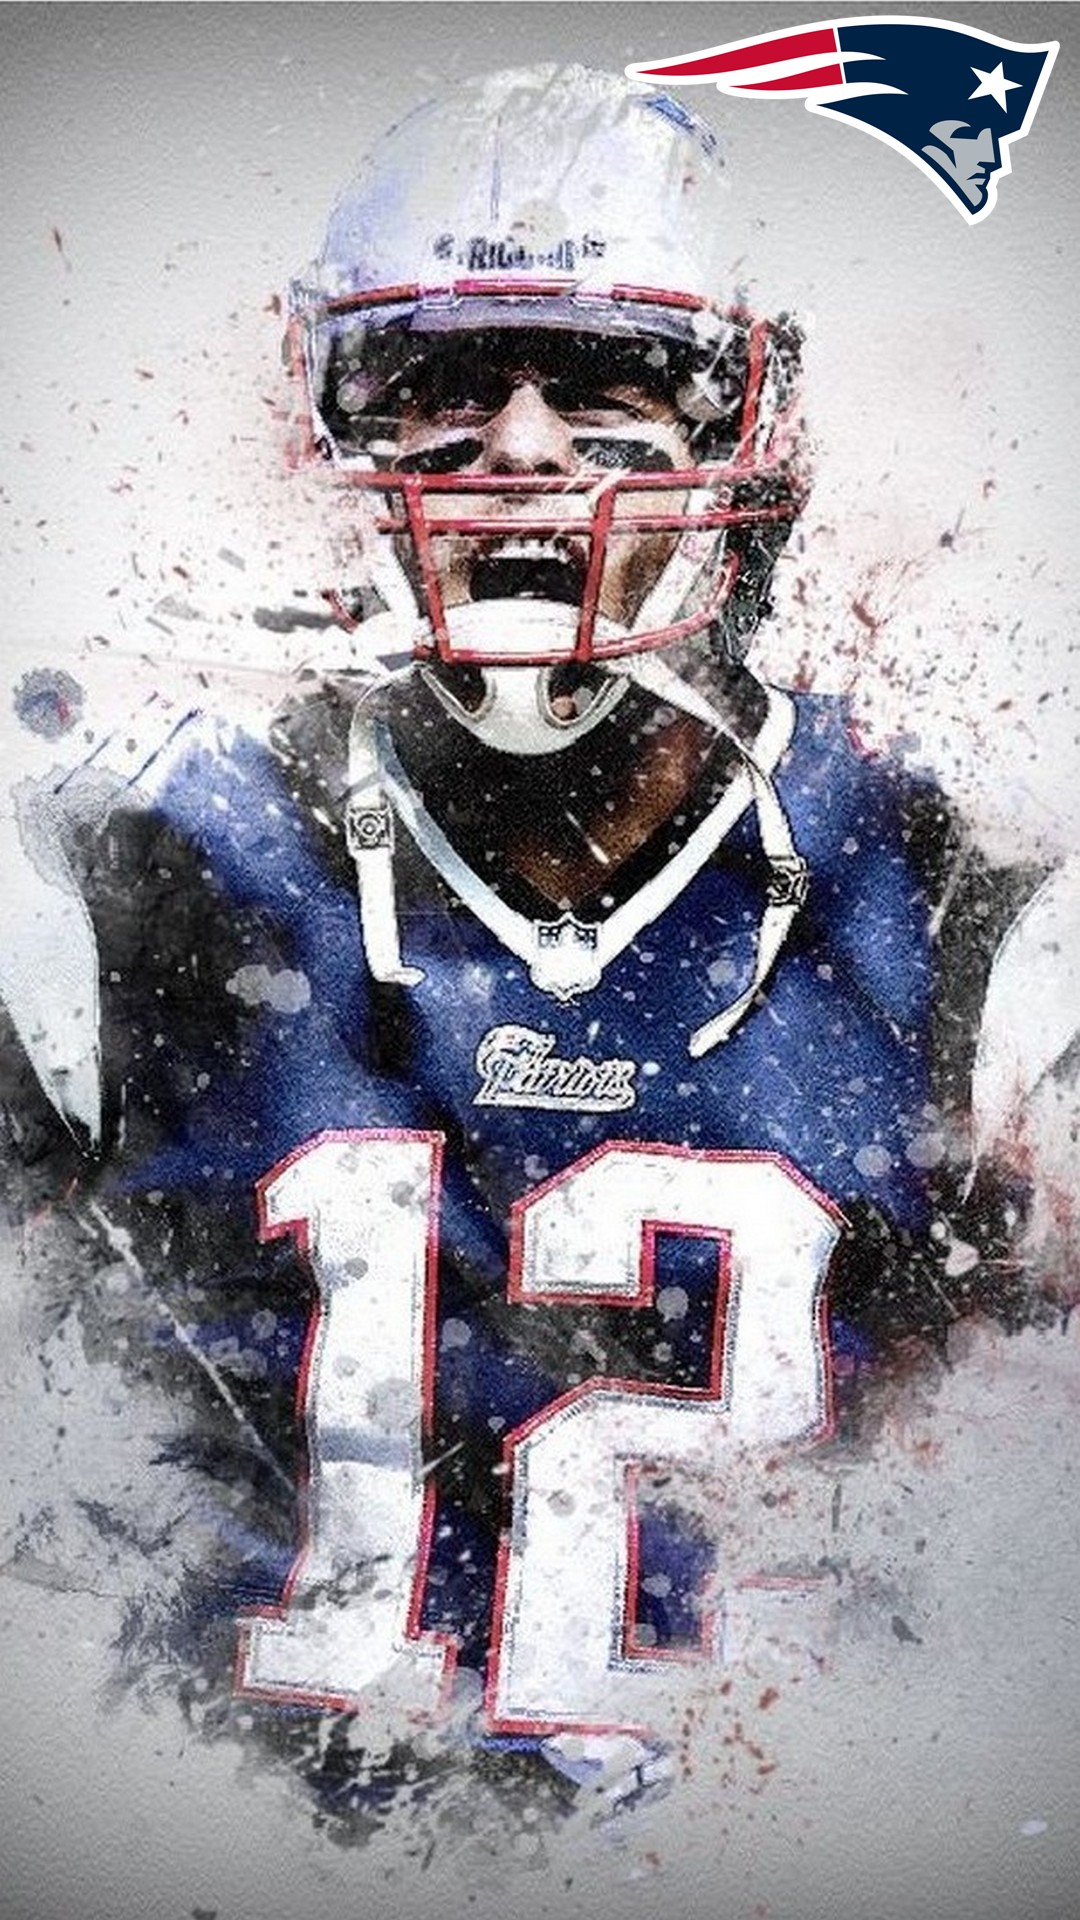 Tom Brady Patriots HD Wallpaper For iPhone With Resolution 1080X1920 pixel. You can make this wallpaper for your Mac or Windows Desktop Background, iPhone, Android or Tablet and another Smartphone device for free